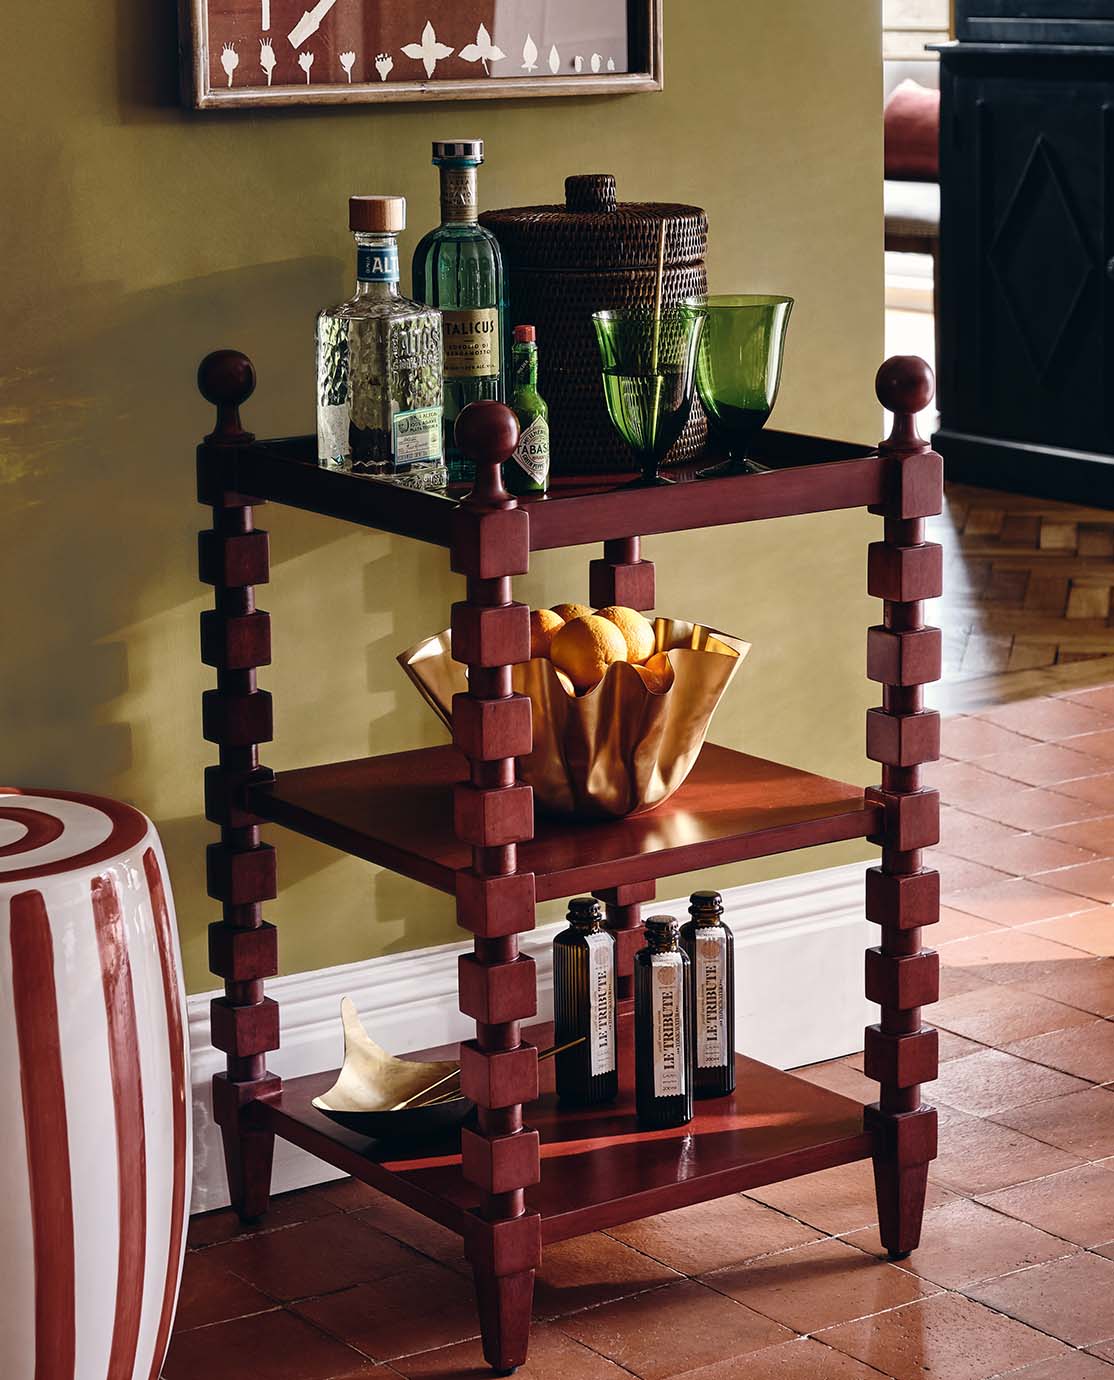 A red side table with cubed, bobbin-style legs, holding a selection of drinks and colourful glassware.